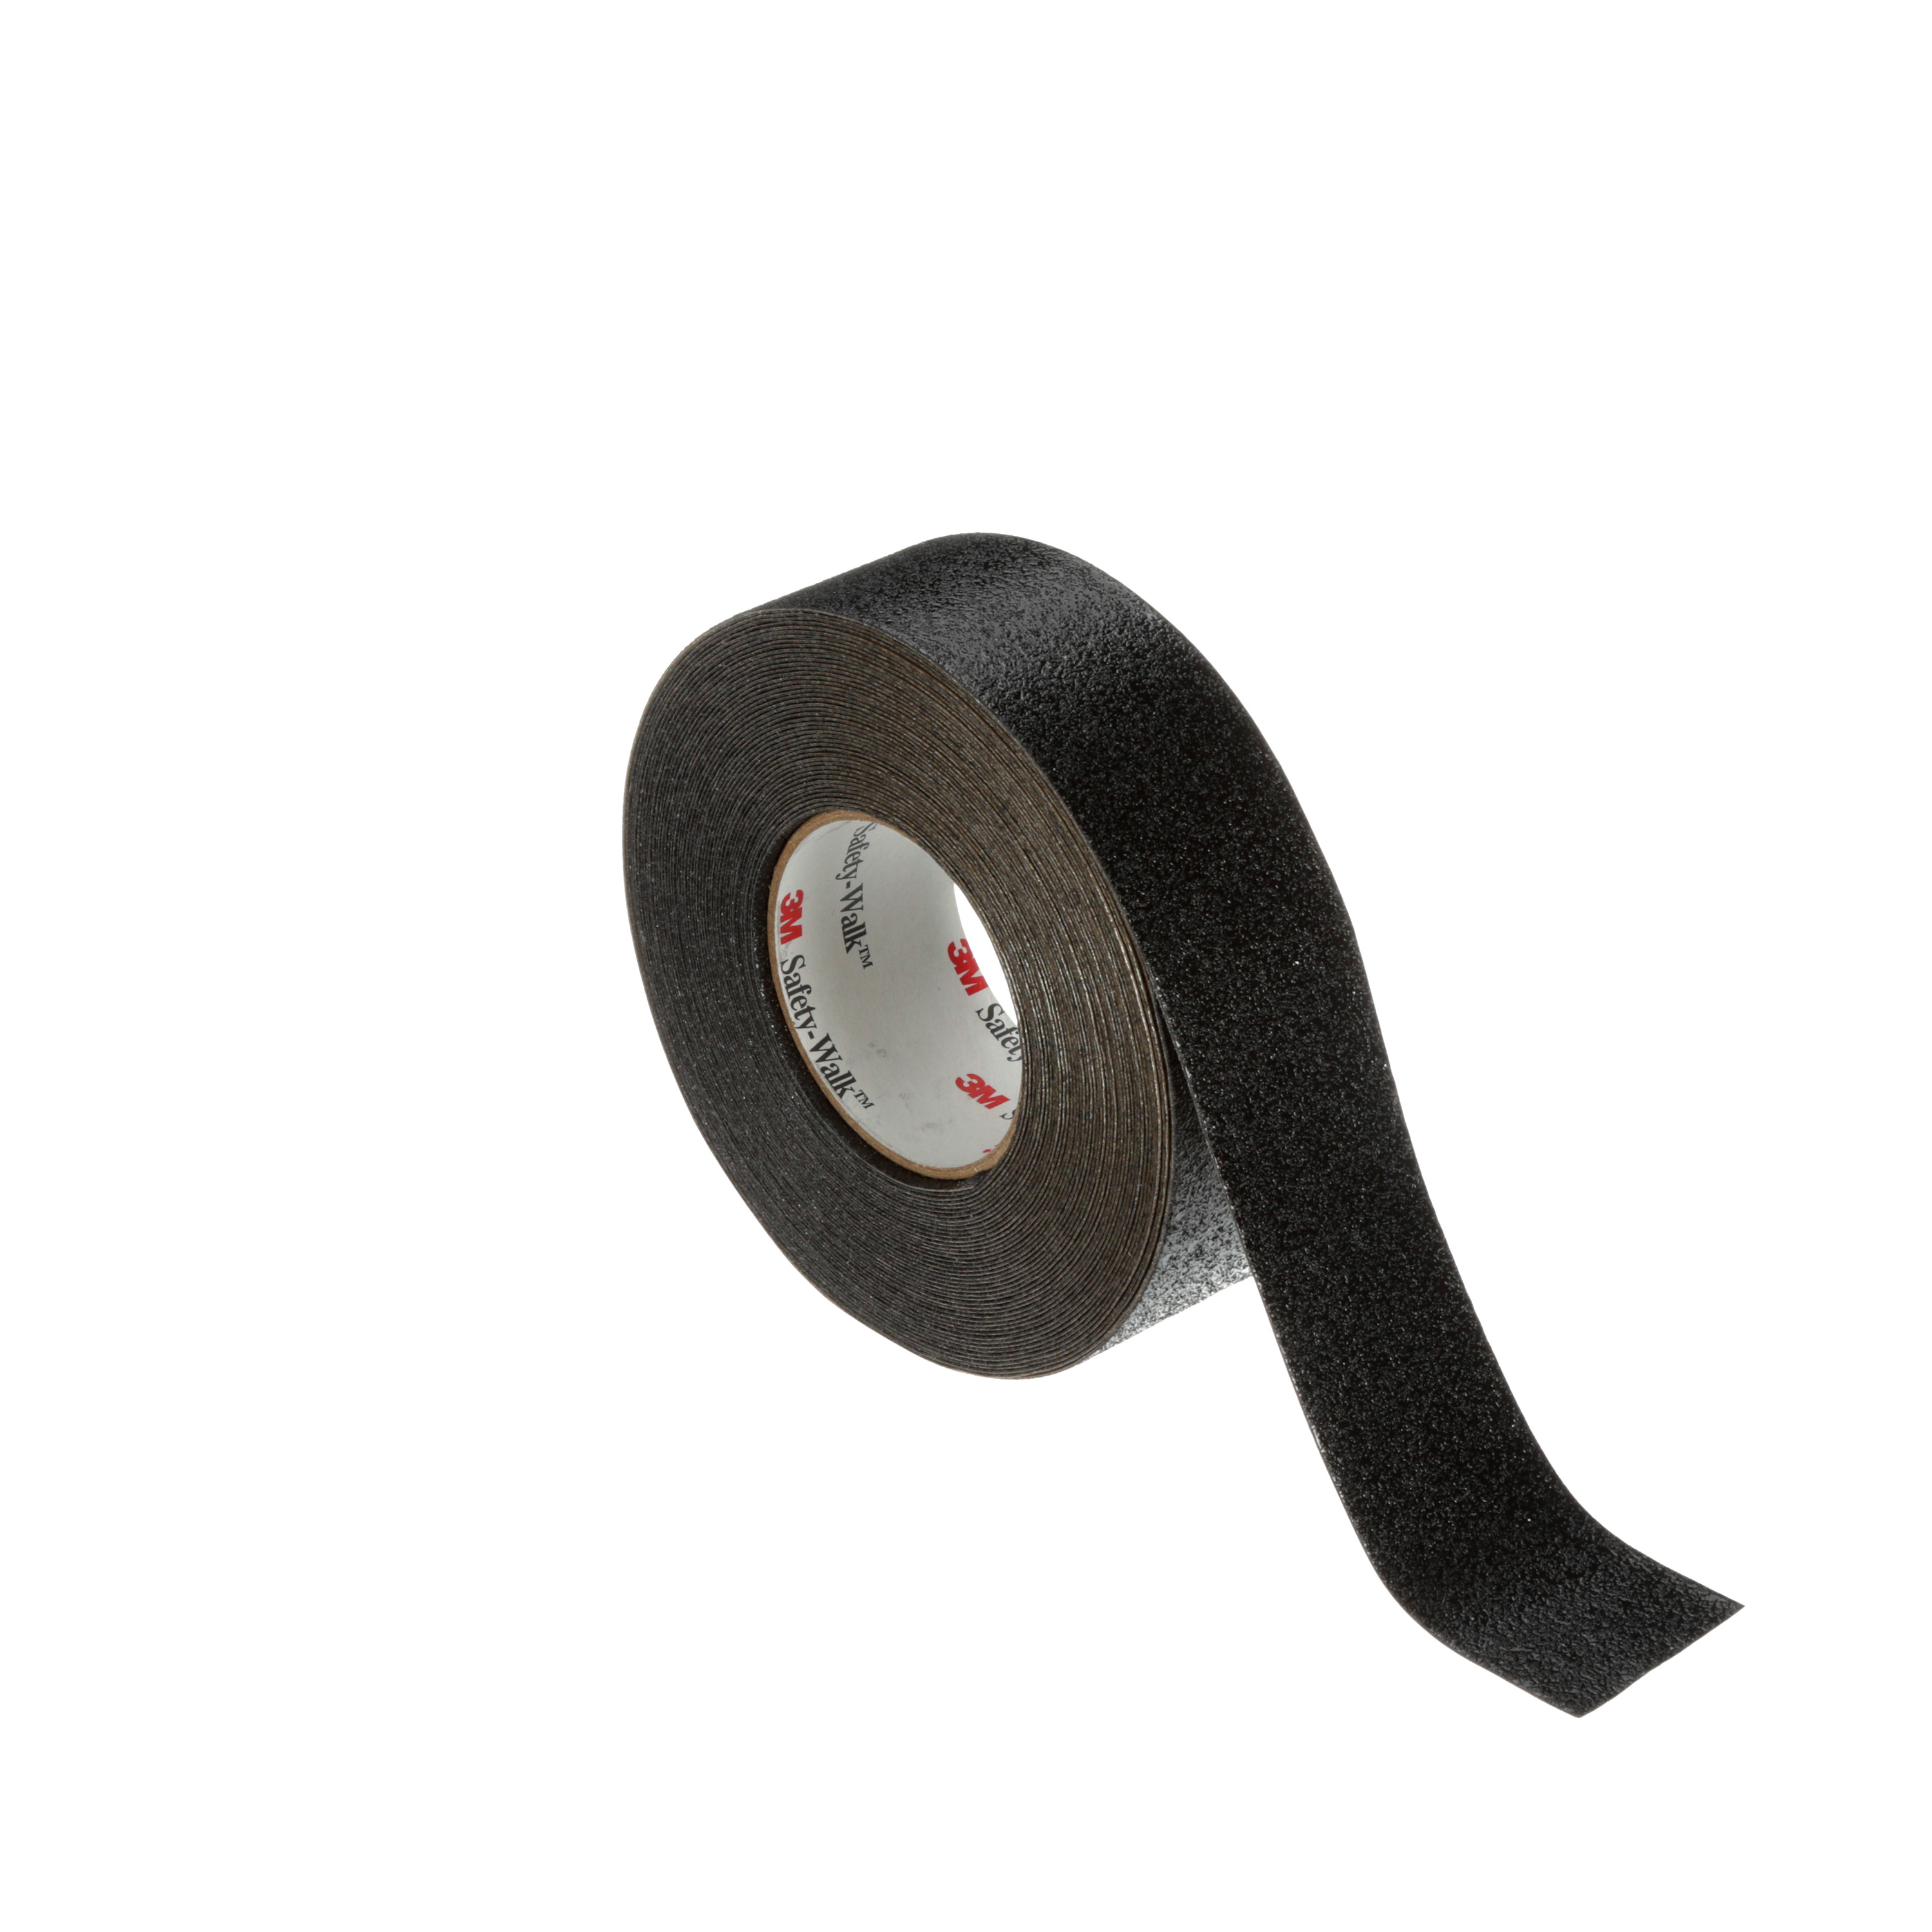 3M™ Safety-Walk™ Slip-Resistant Conformable Tapes & Treads 510, Black, 2
in x 60 ft, Roll, 2/Case